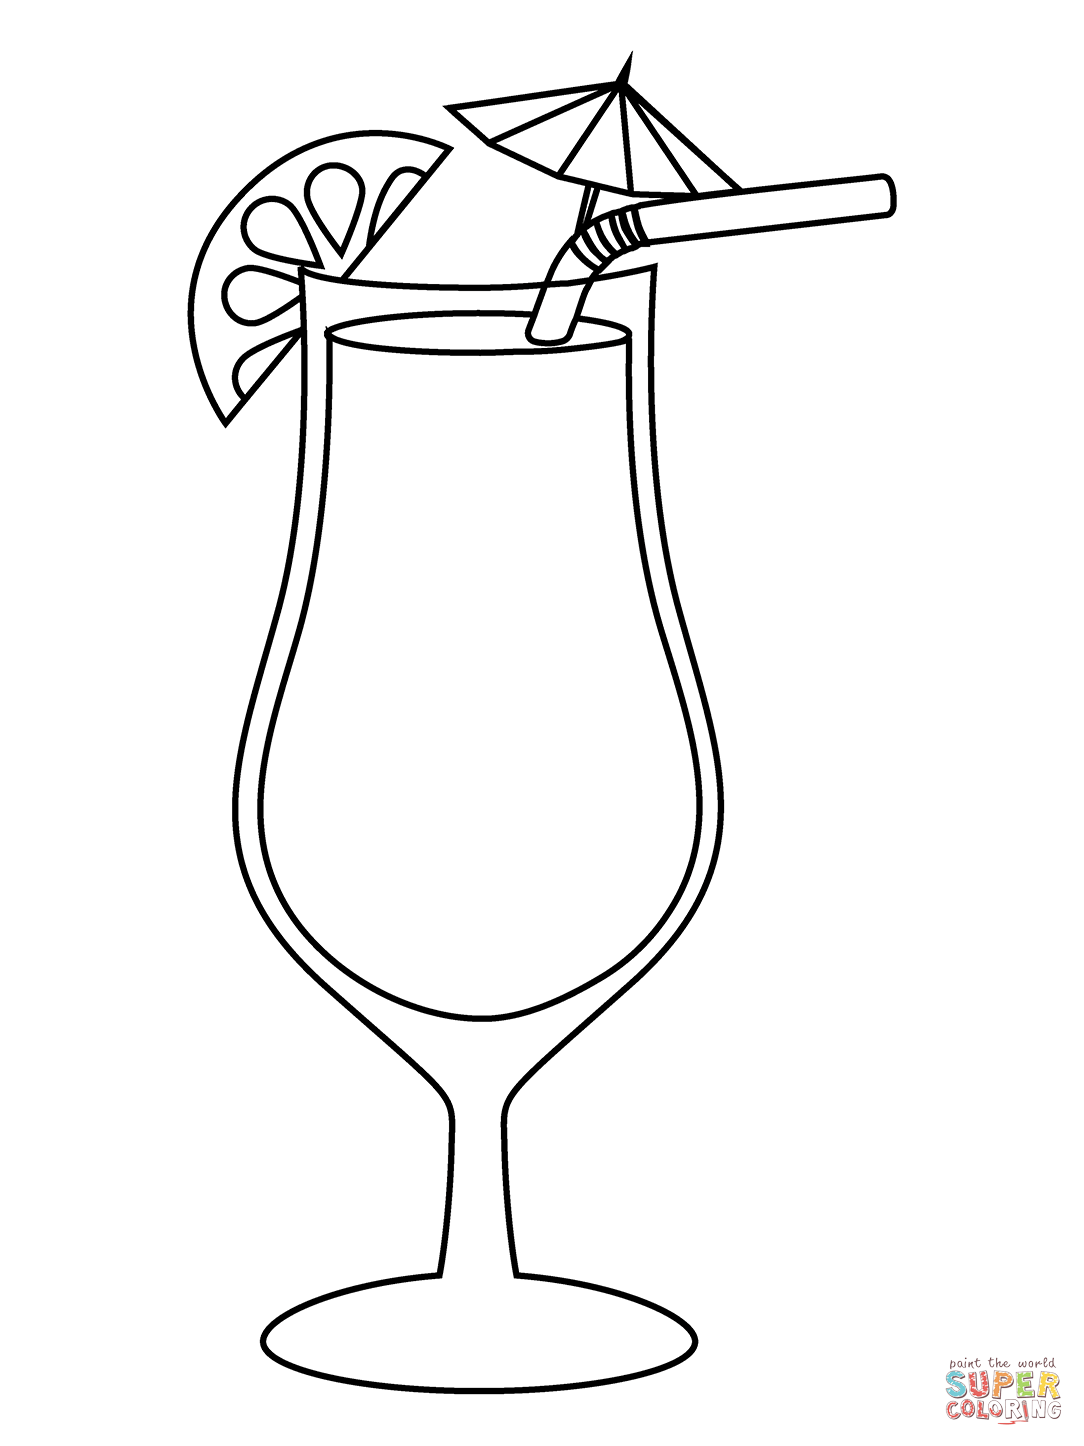 Tropical drink emoji coloring page free printable coloring pages